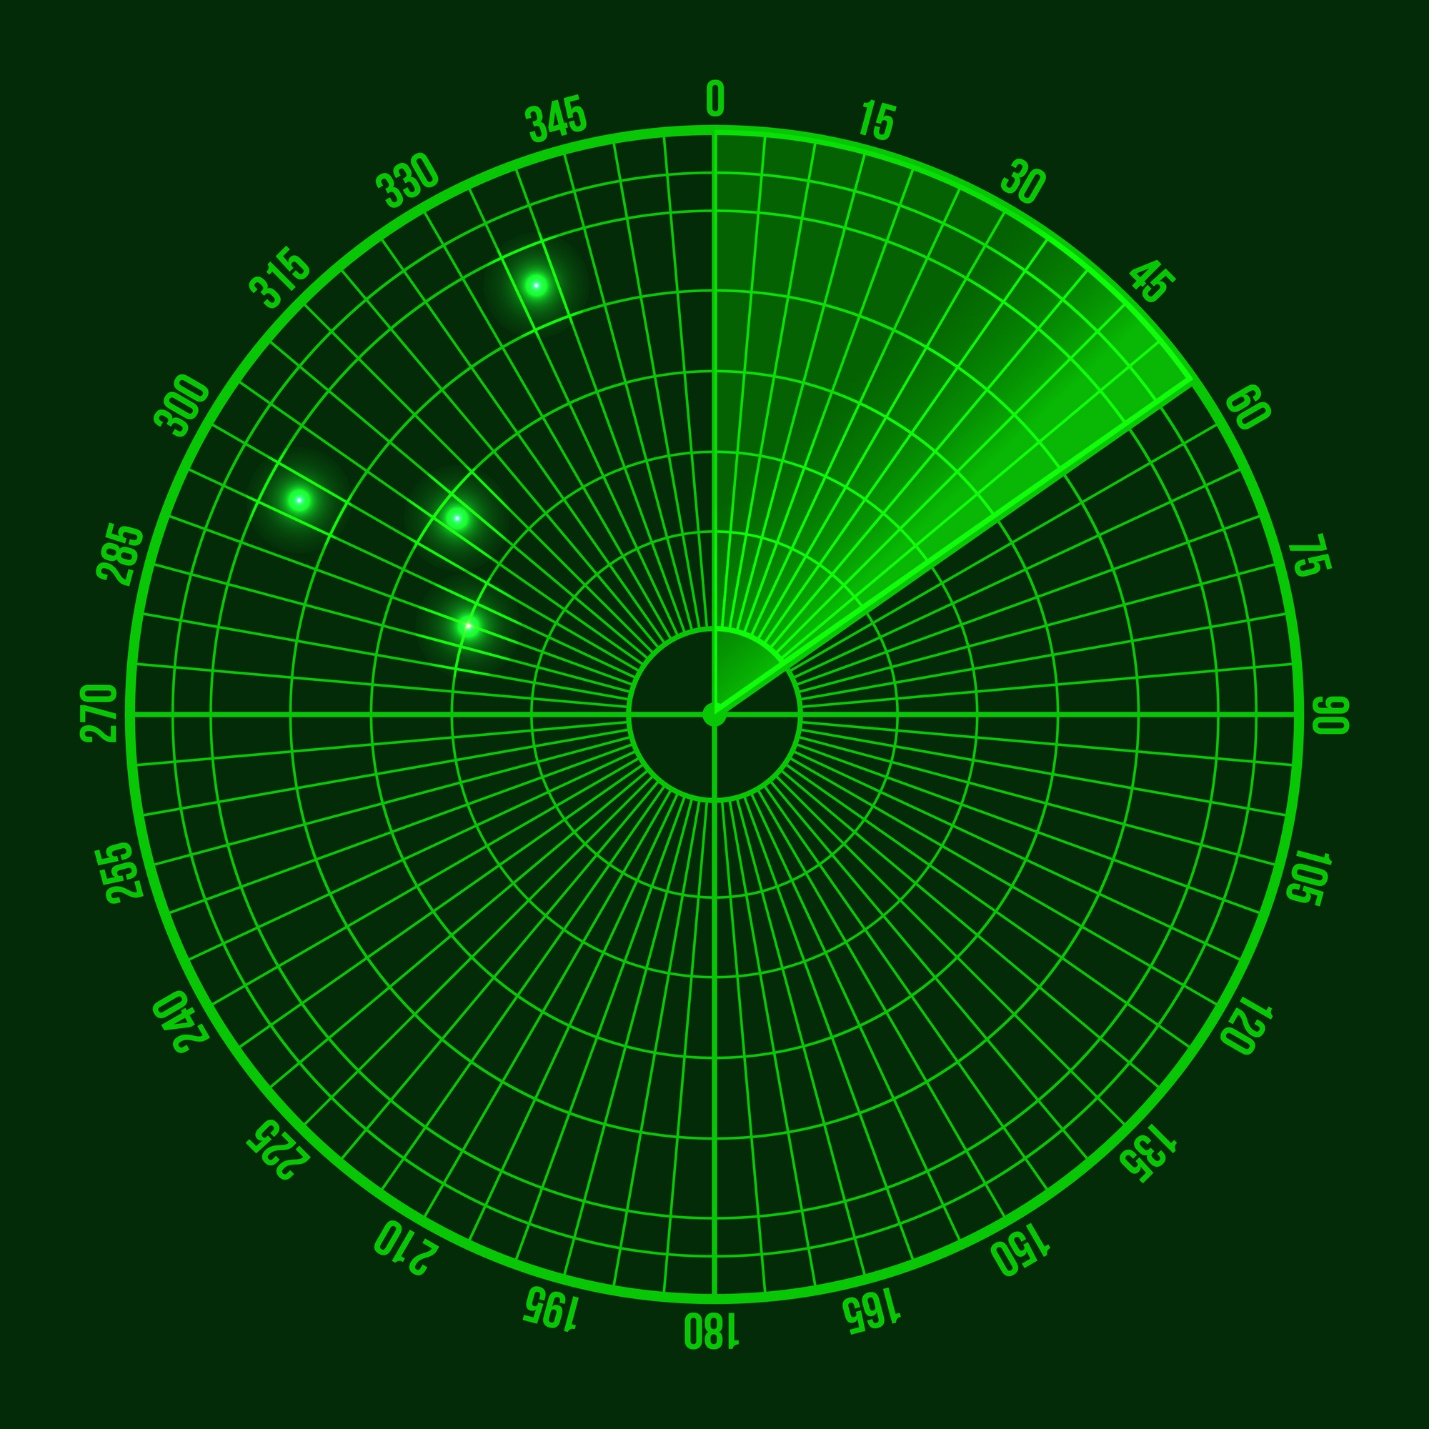 A green grid with a point in the center

Description automatically generated